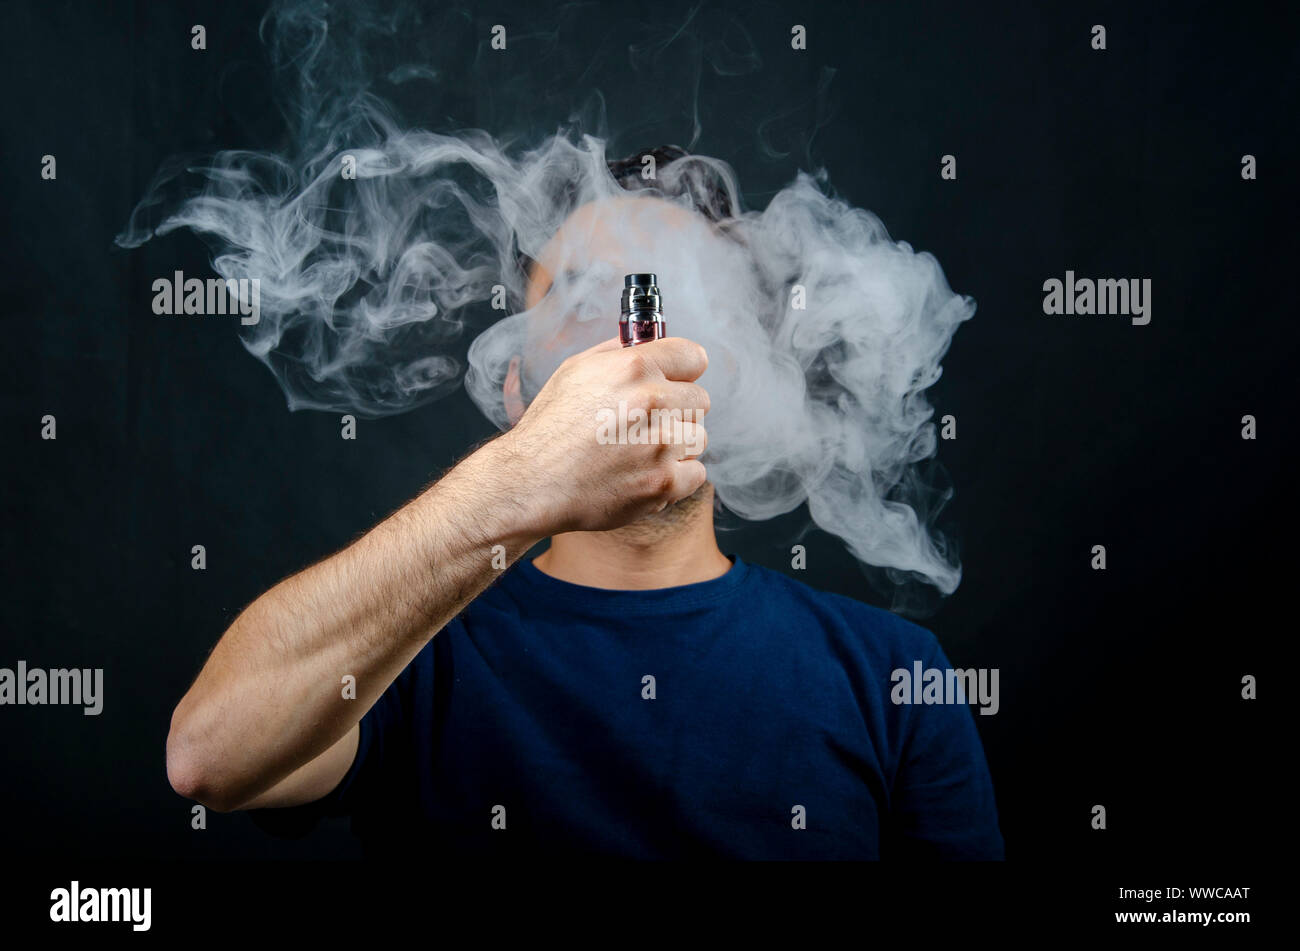 hand holding vape e-cigarette or electronic cigarette with smoke over background Stock Photo Alamy